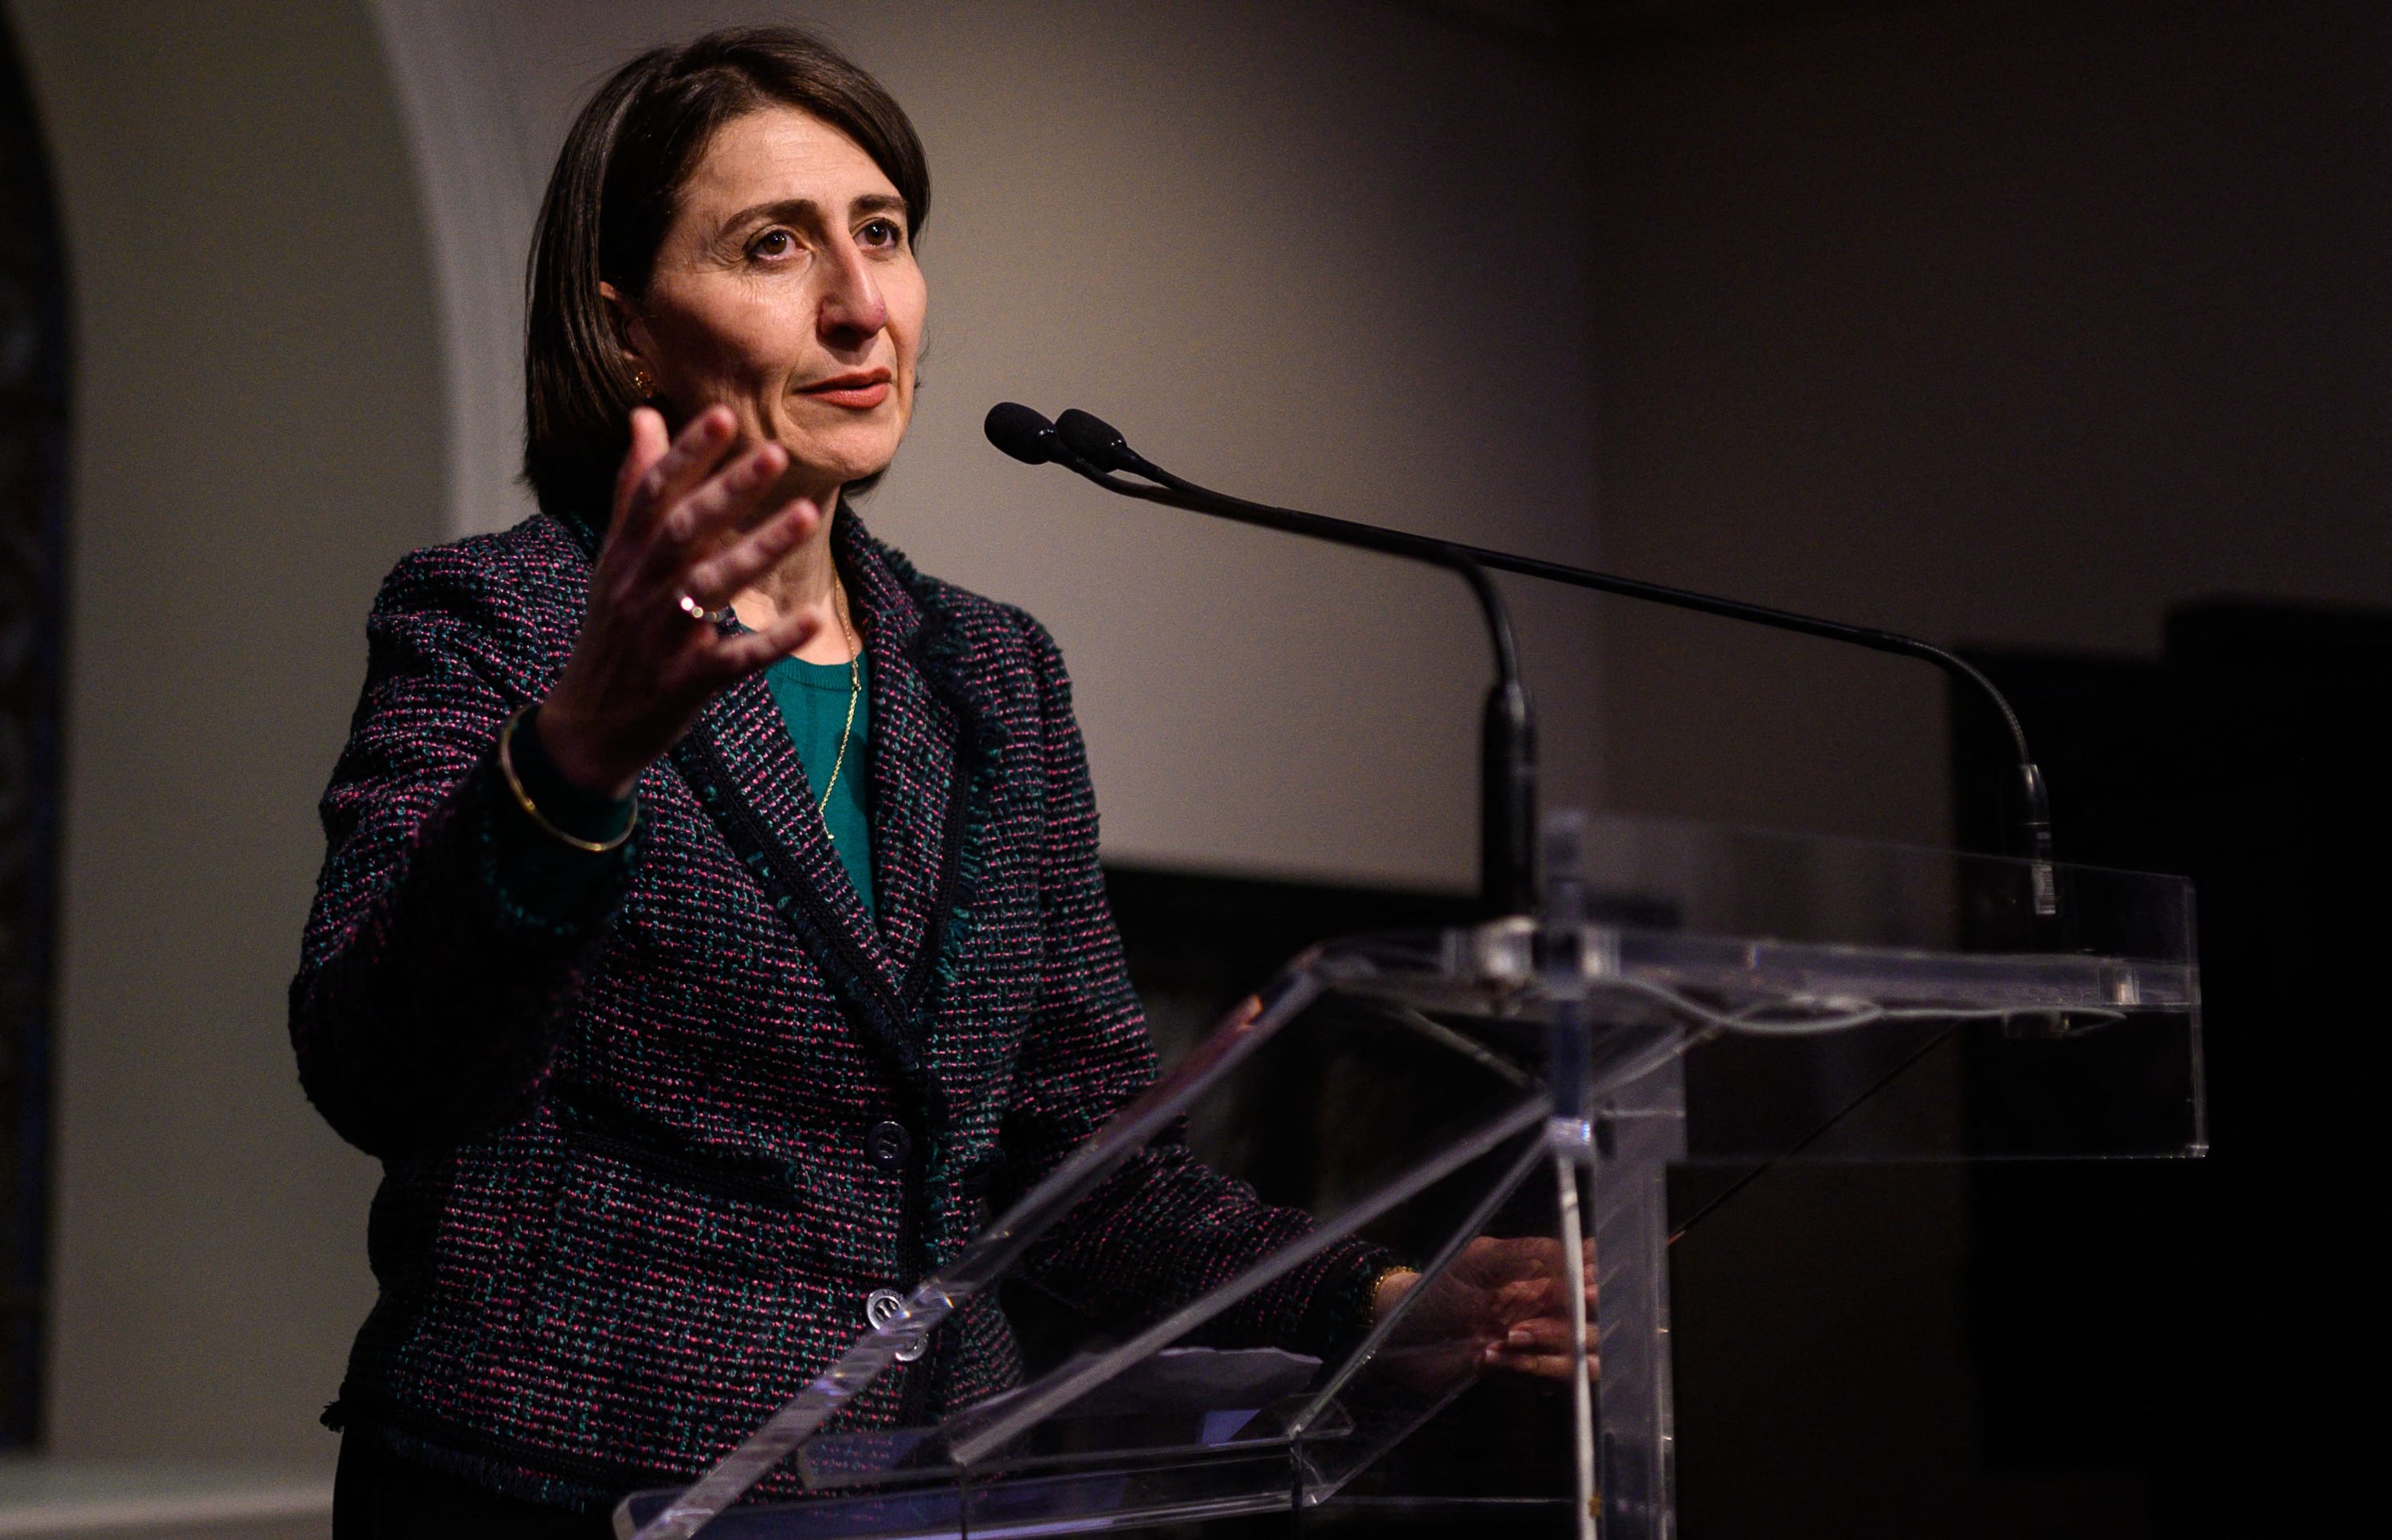 New South Wales Premier Gladys Berejiklian speaks after a State Library tour by the visiting Netherlands Prime Minister Mark Rutte in Sydney on October 9, 2019.